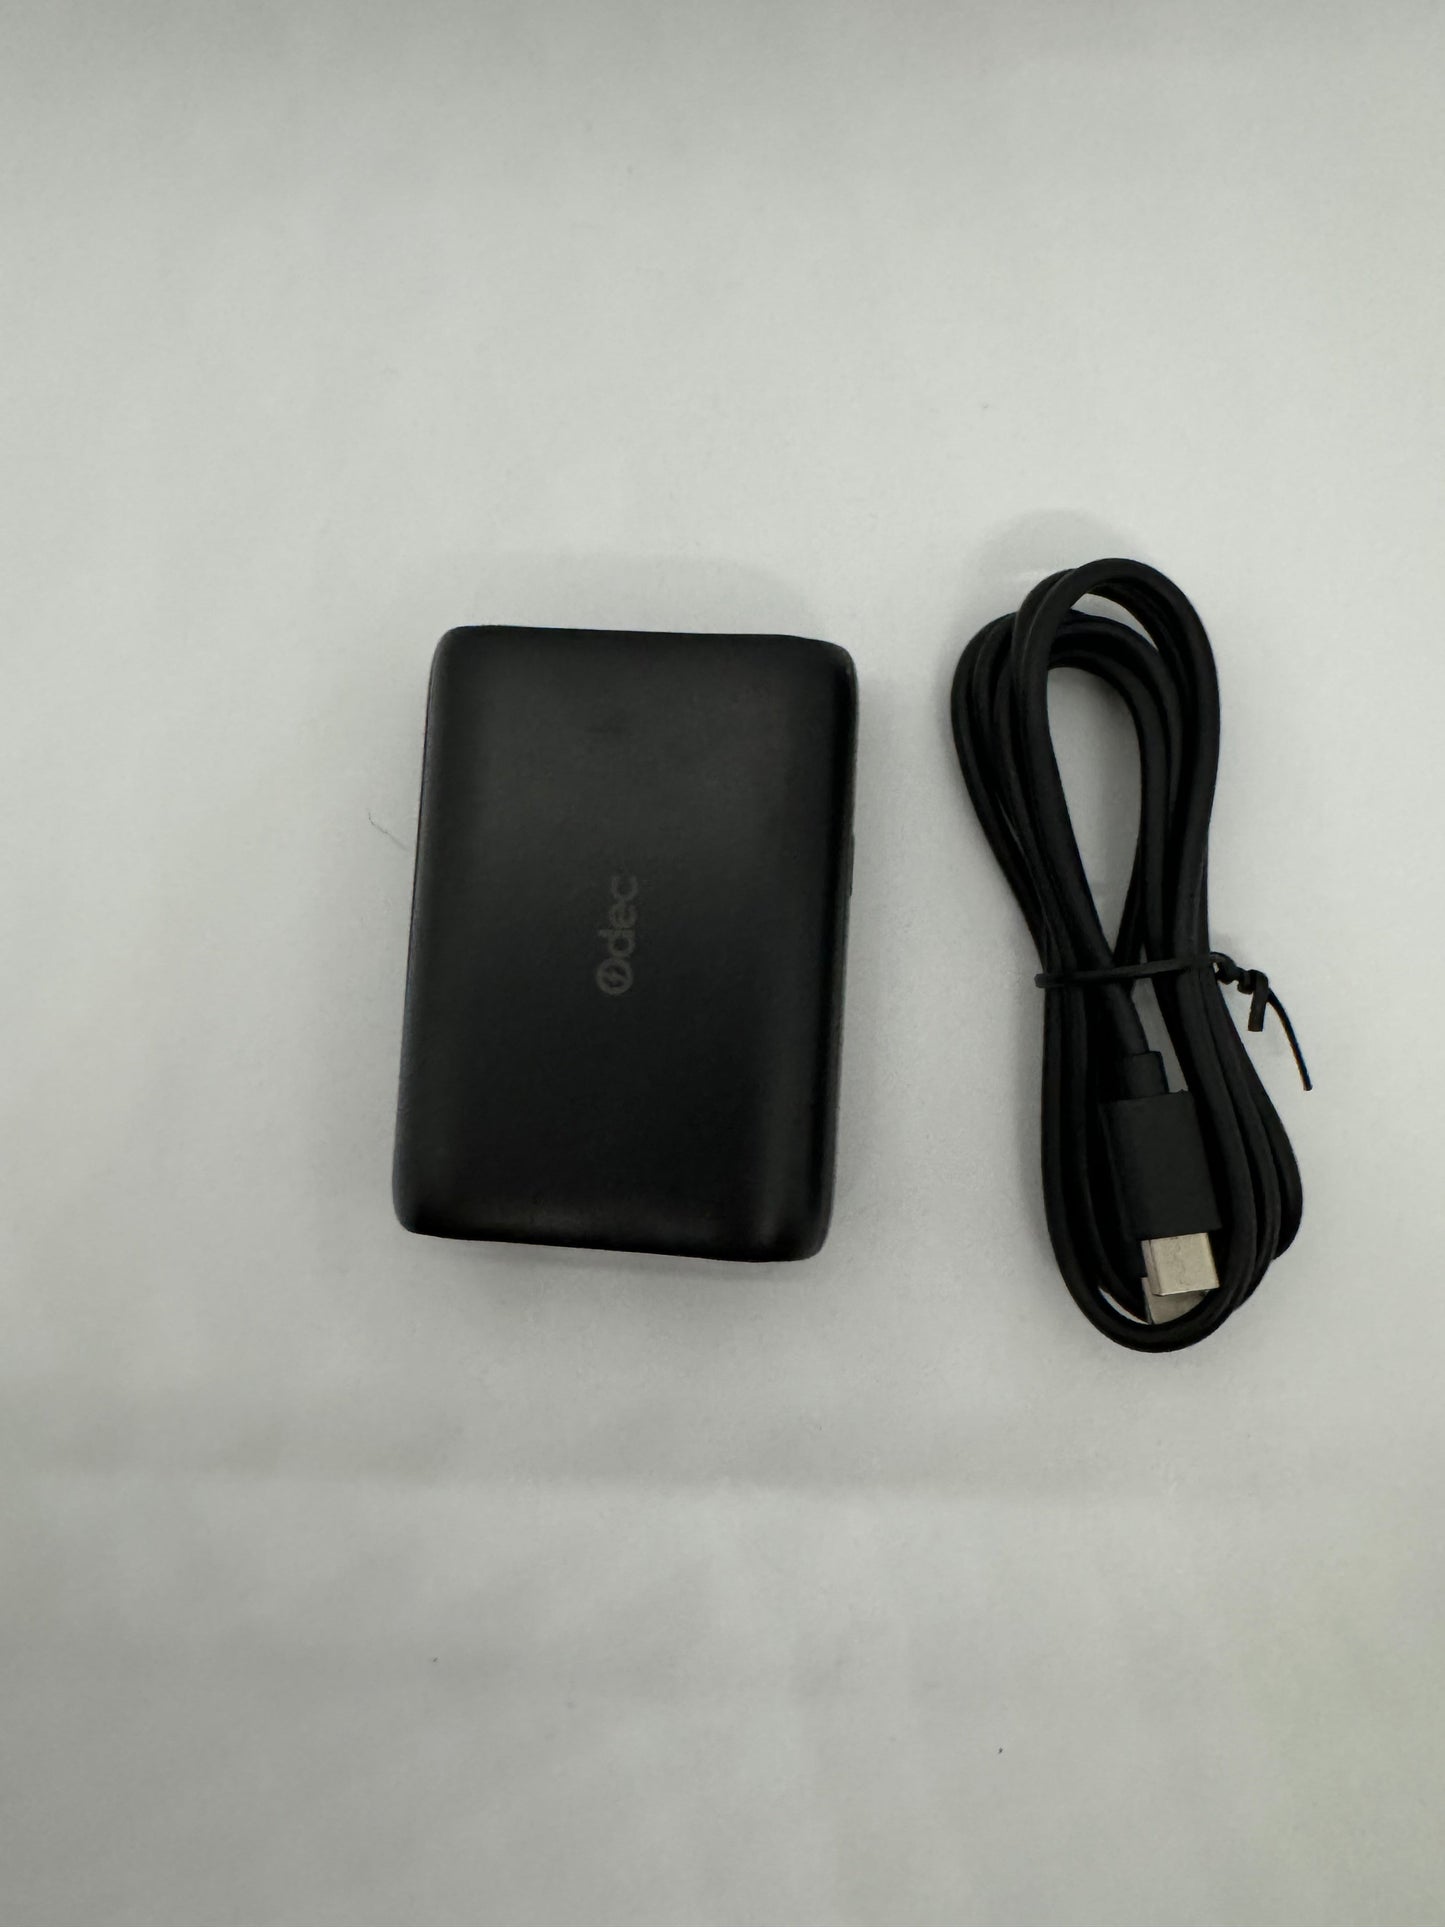 Be My AI: The picture shows two items on a white background. On the left, there is a black rectangular object that appears to be a portable charger or power bank. It has a matte finish and the letters "abc" are visible on it. On the right side of the picture, there is a black USB cable coiled up. The cable seems to be new or rarely used.